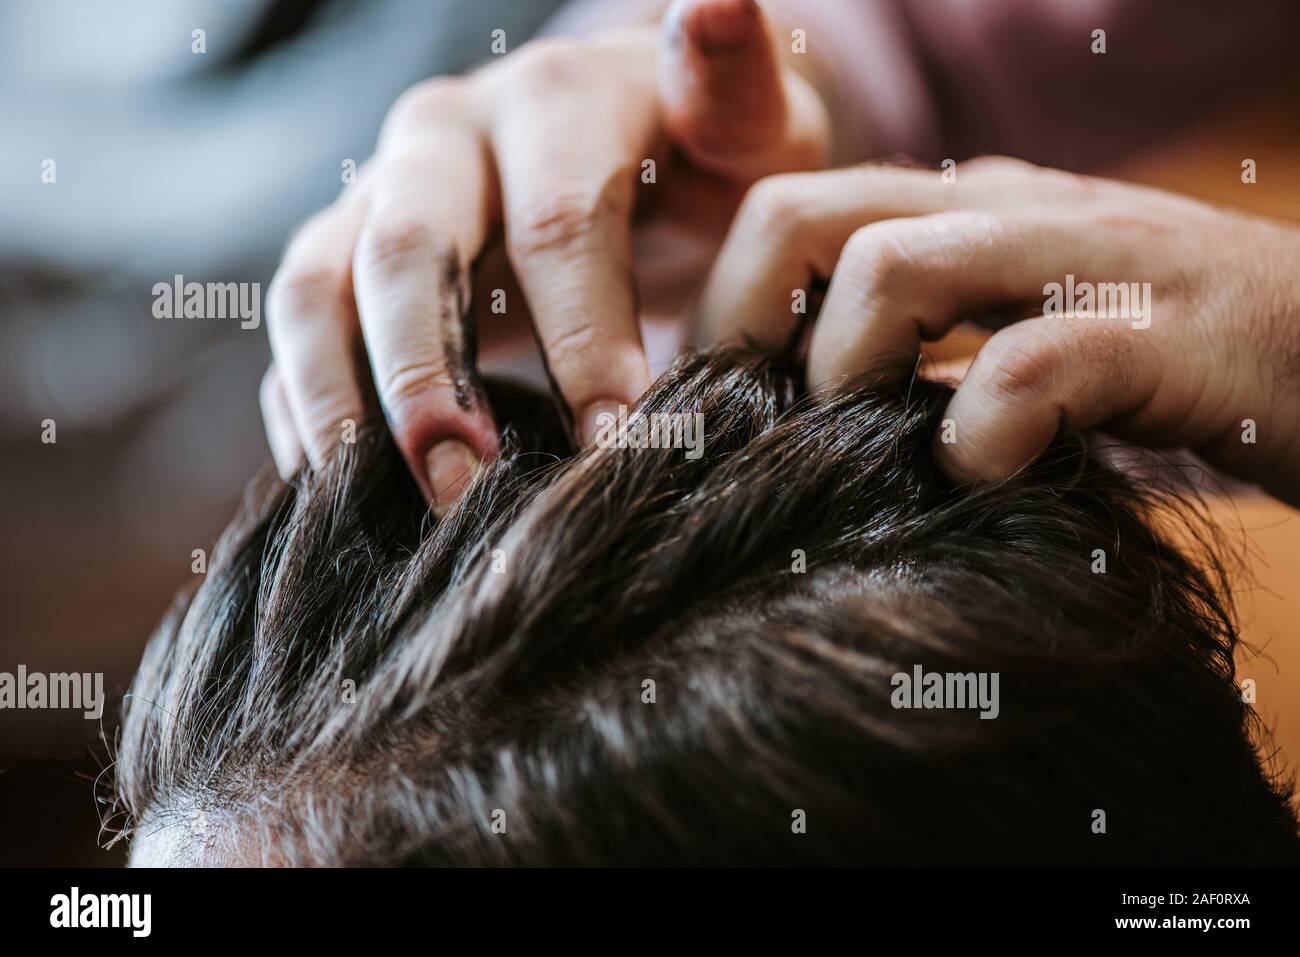 cropped view of barber with black hair pomade on hands styling hair of man in barbershop Stock Photo